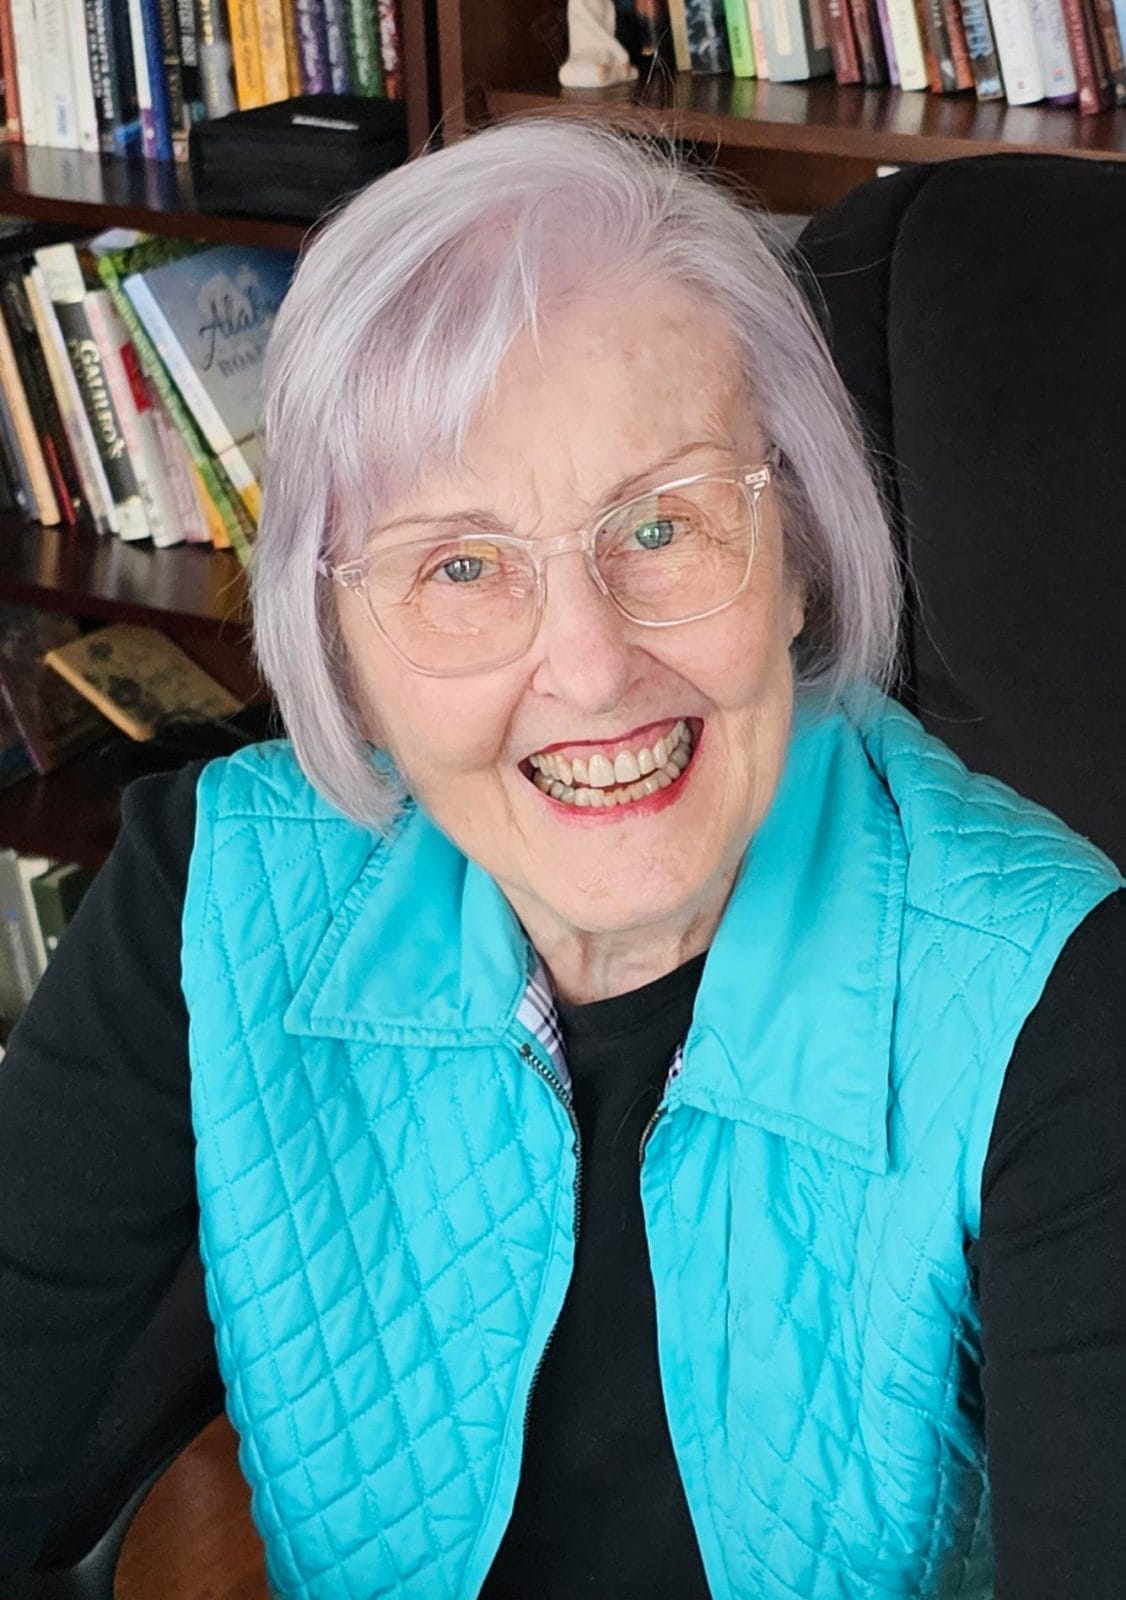 Elderly woman, Elizabeth Gunter Powell, with light purple hair wearing glasses and a blue vest, smiling in front of a bookshelf.